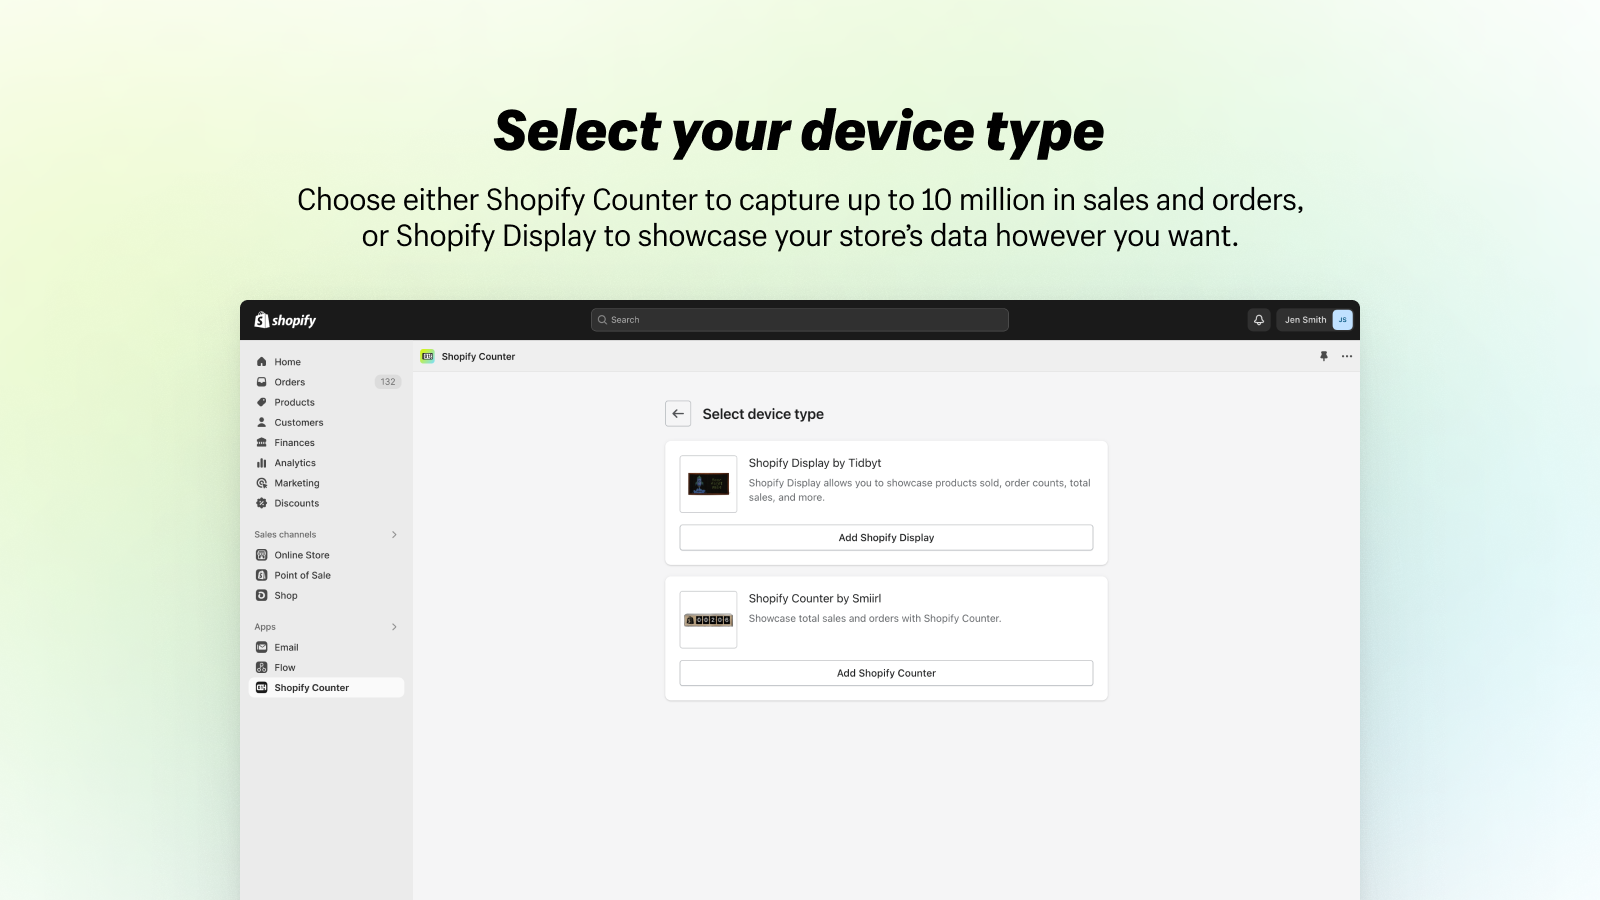 Two devices are shown: Shopify Display and Shopify Counter